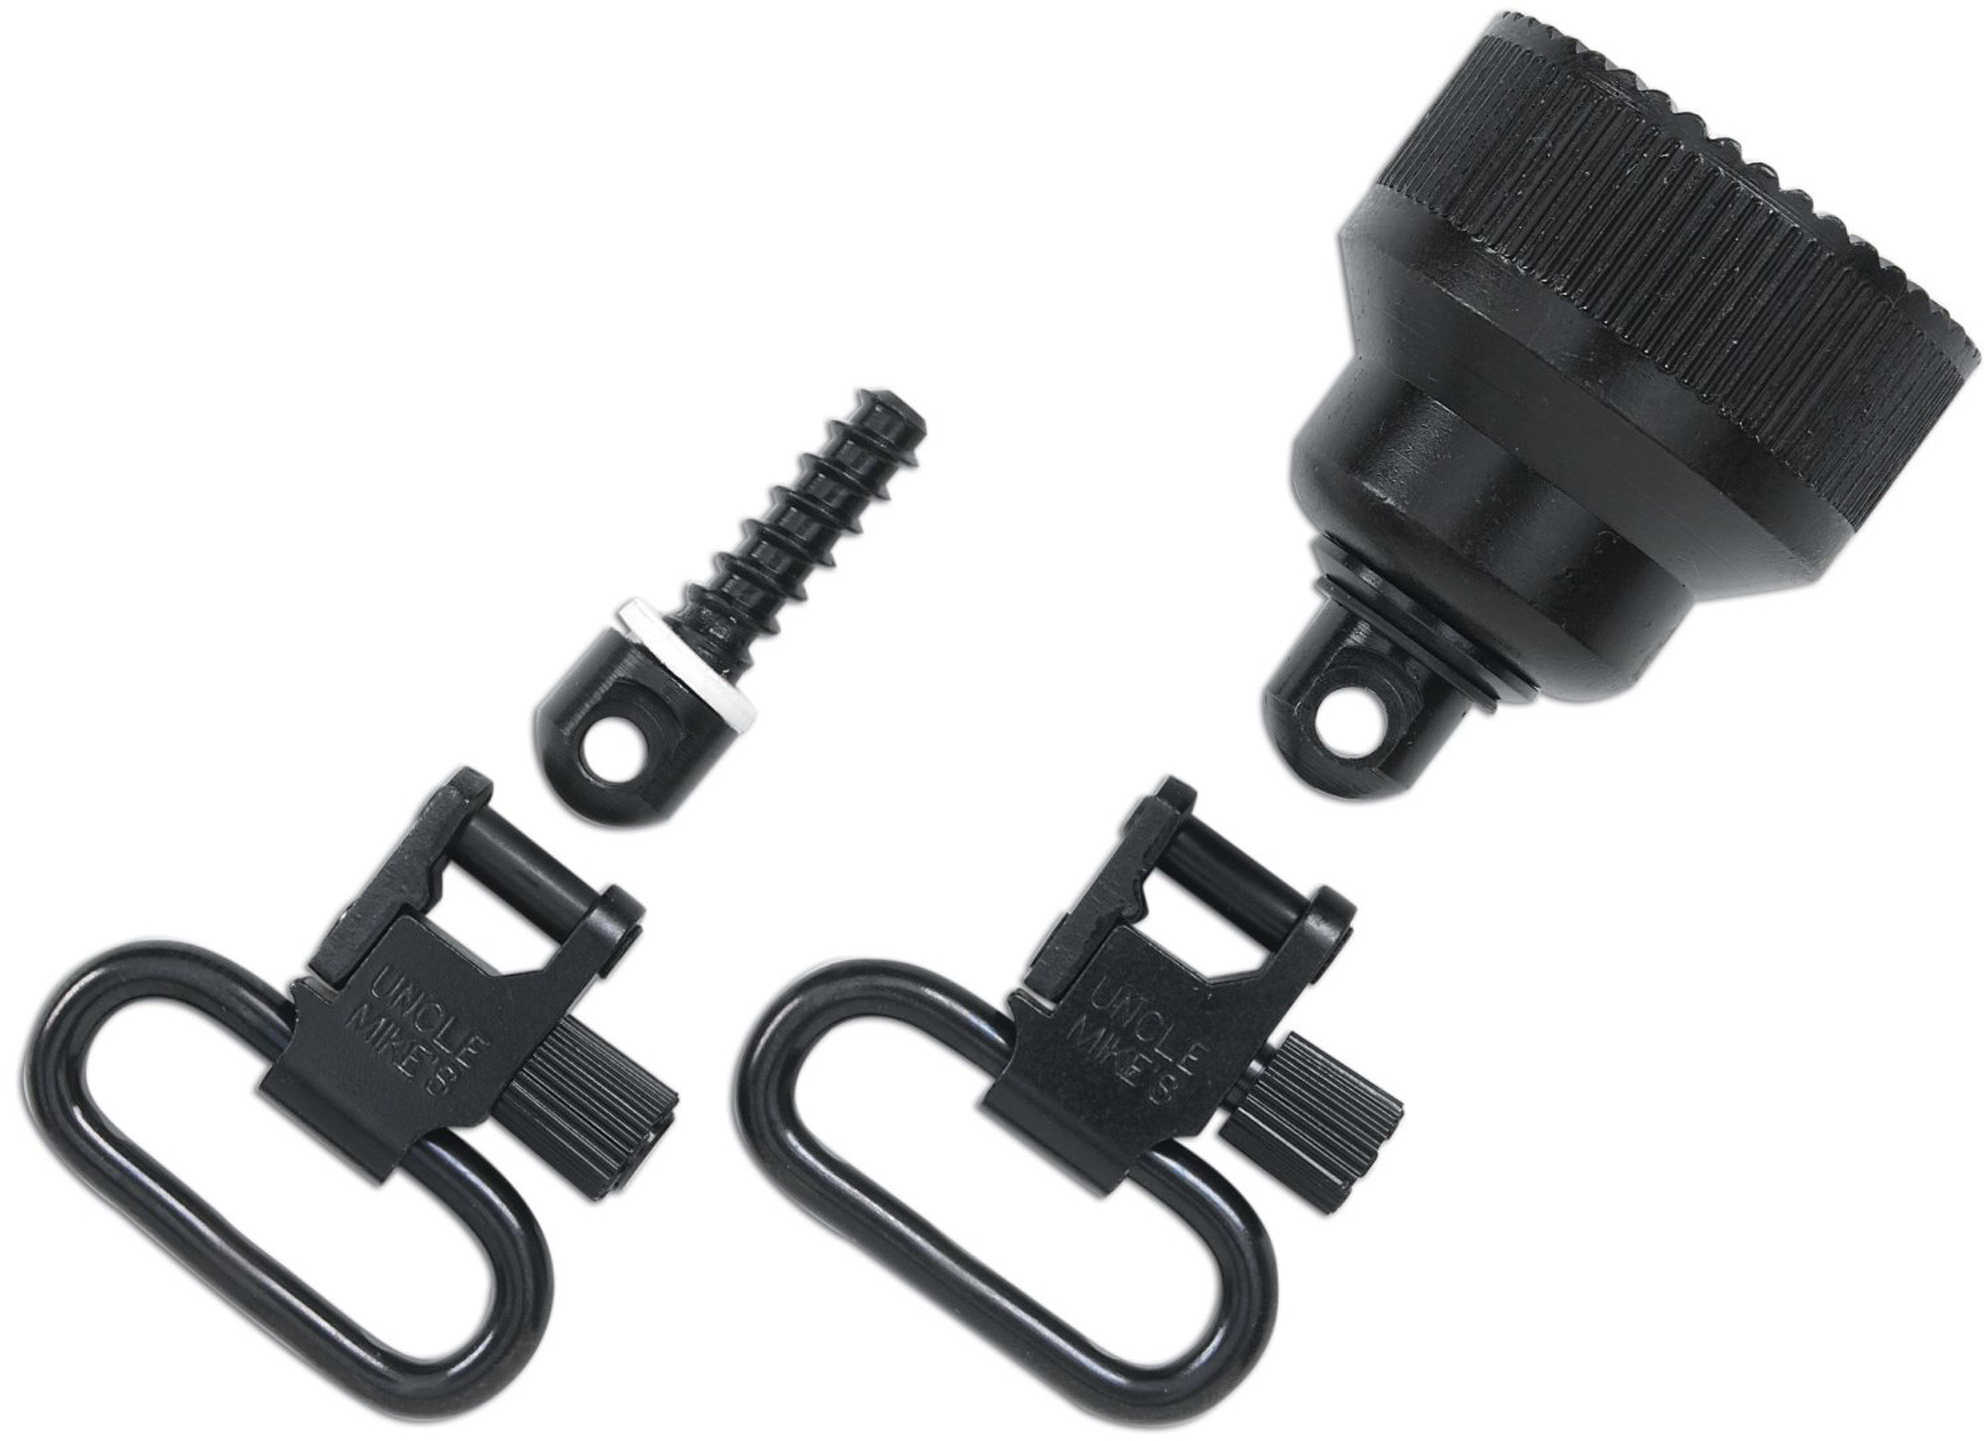 Uncle Mikes Magazine Cap Swivel Set For Mossberg 835 Md: 18112